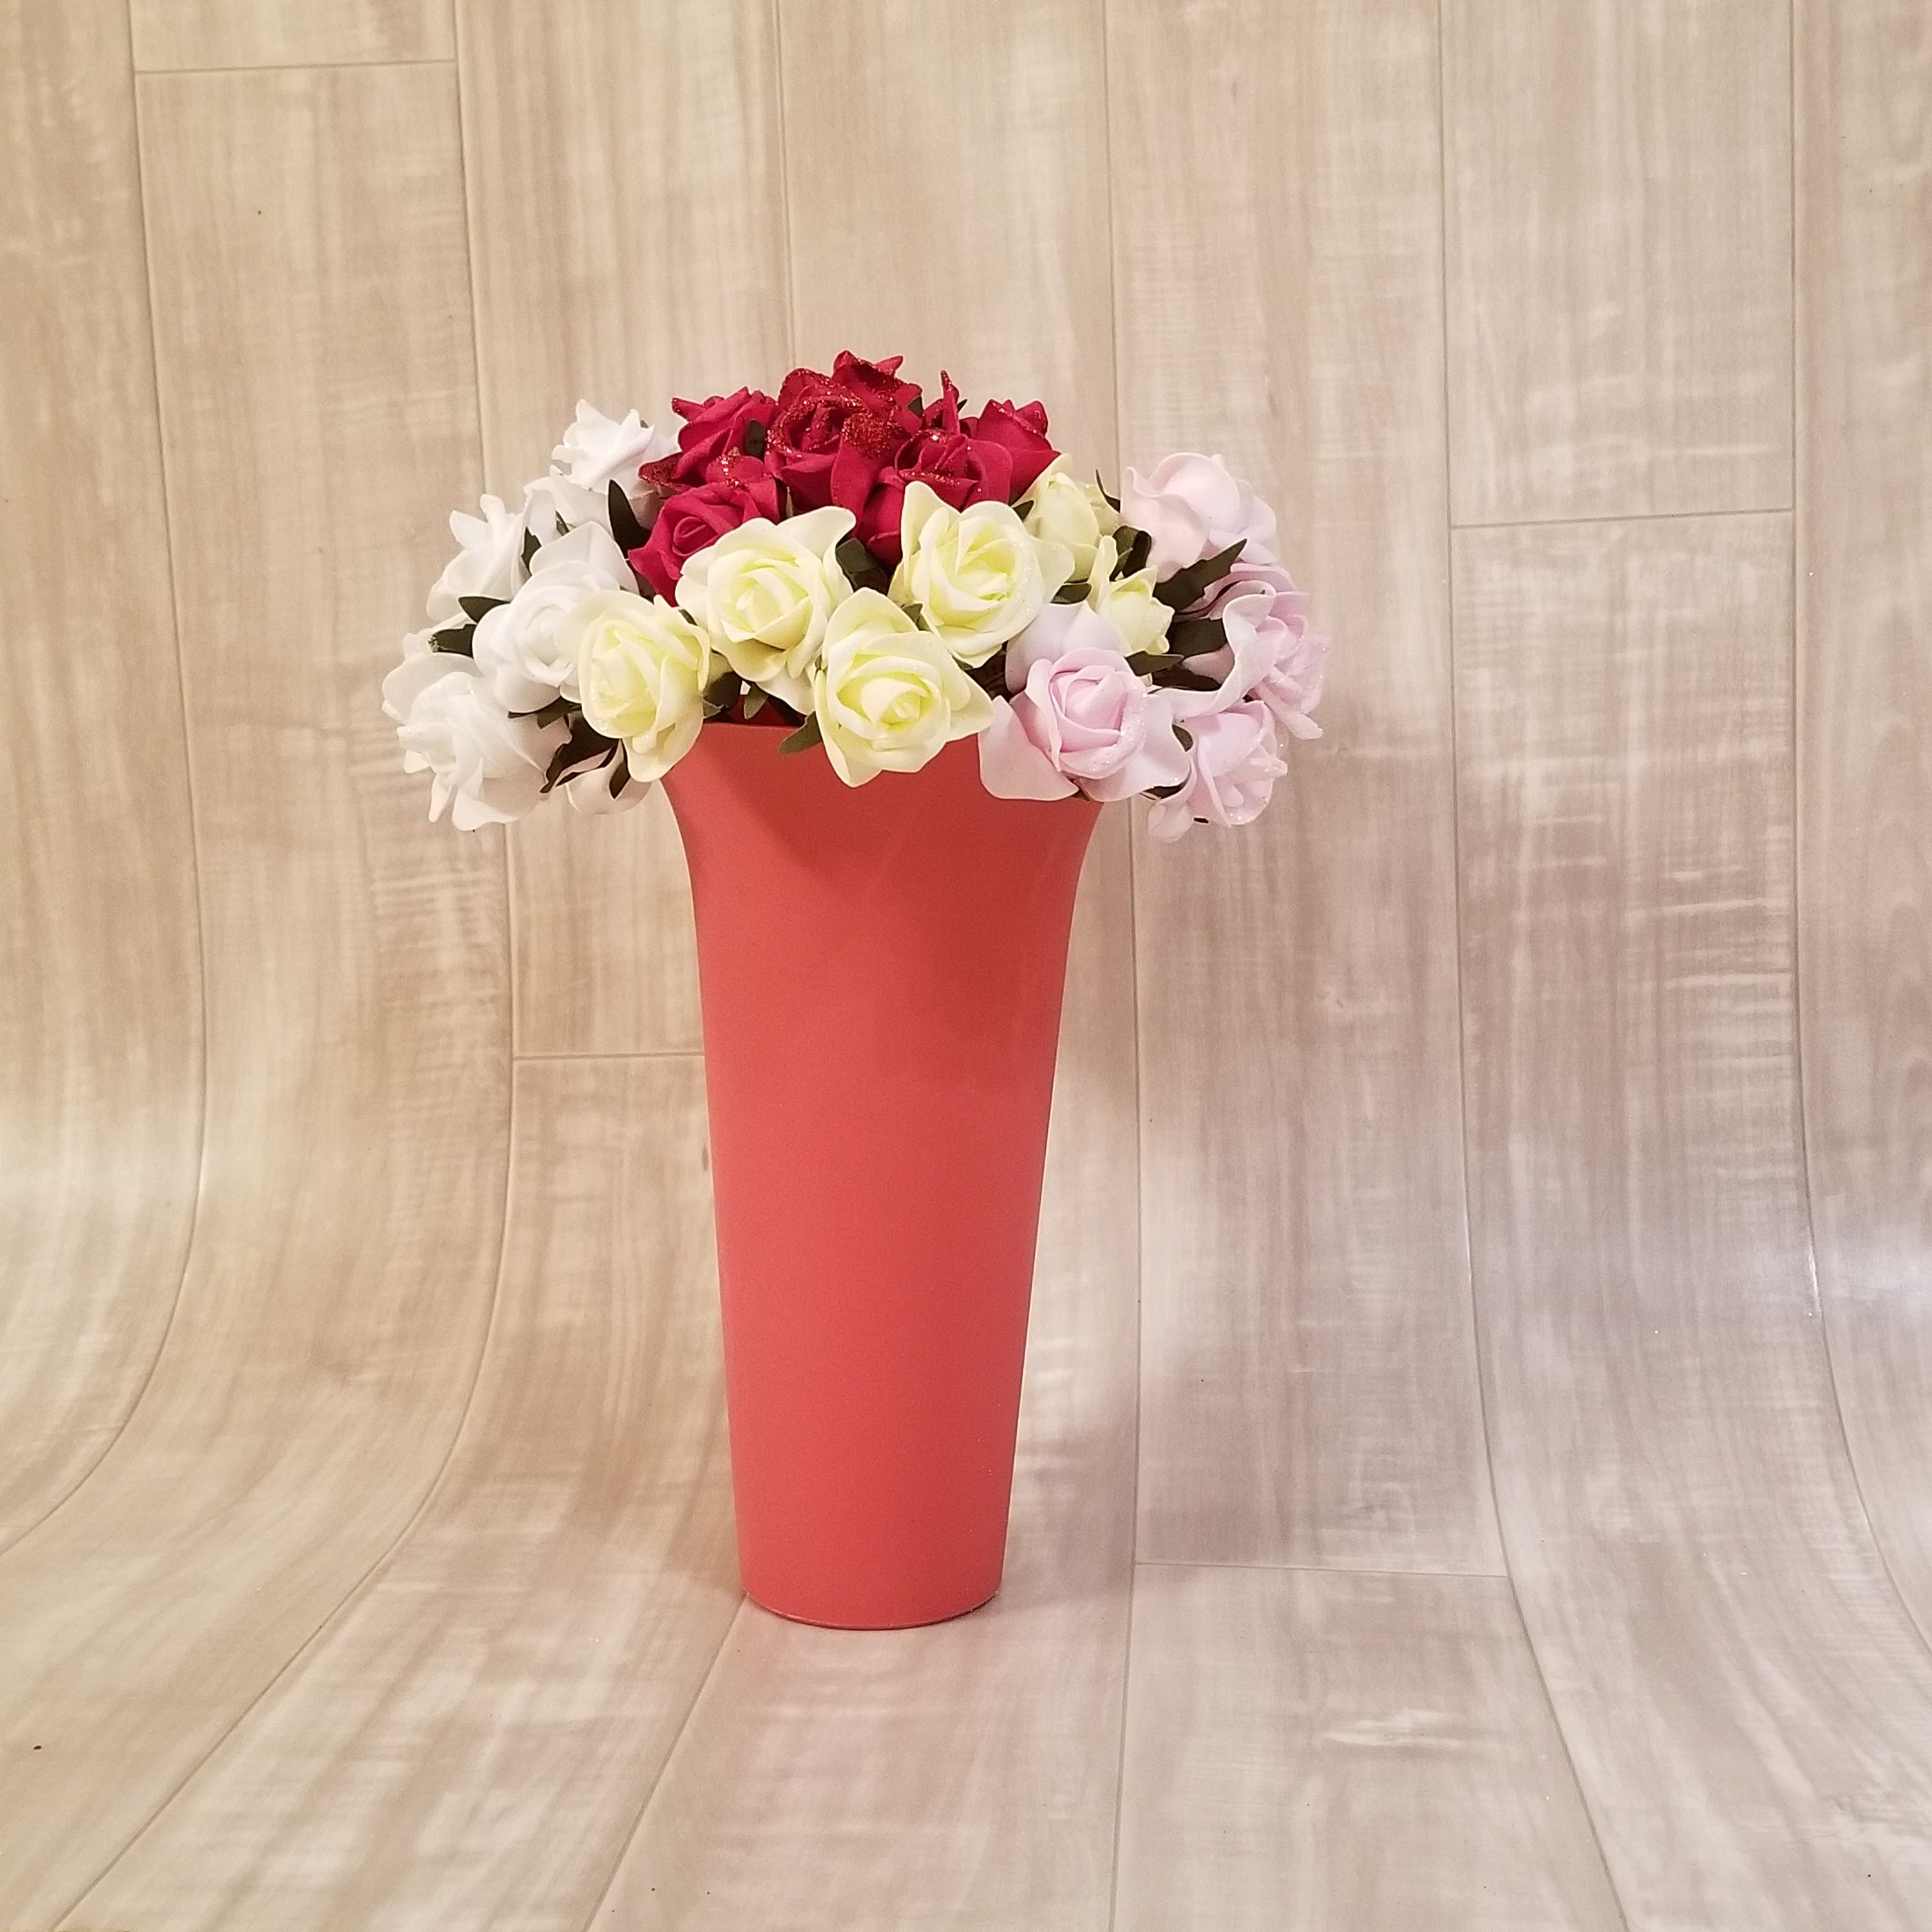 Container for cut flowers